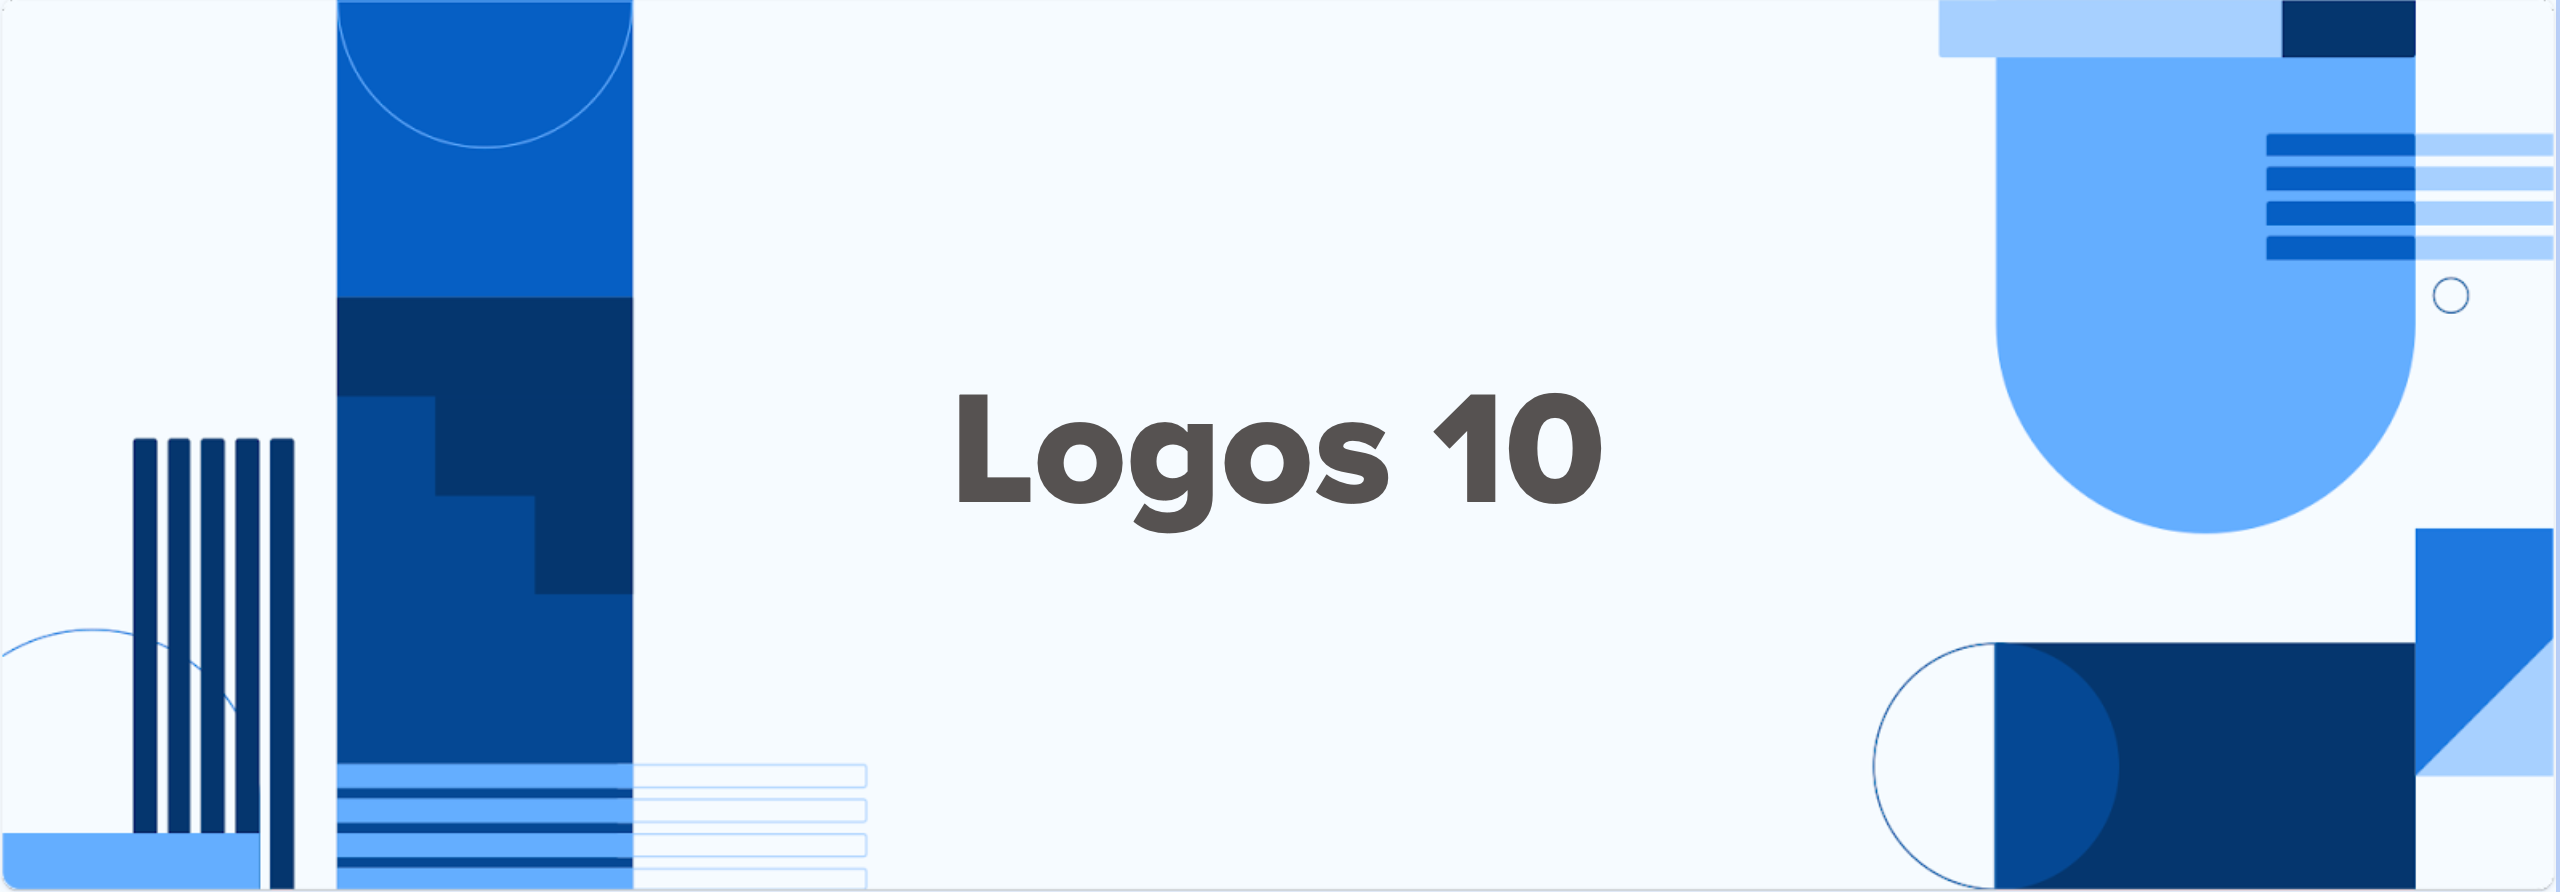 Logos 10 Review: Live in the Word